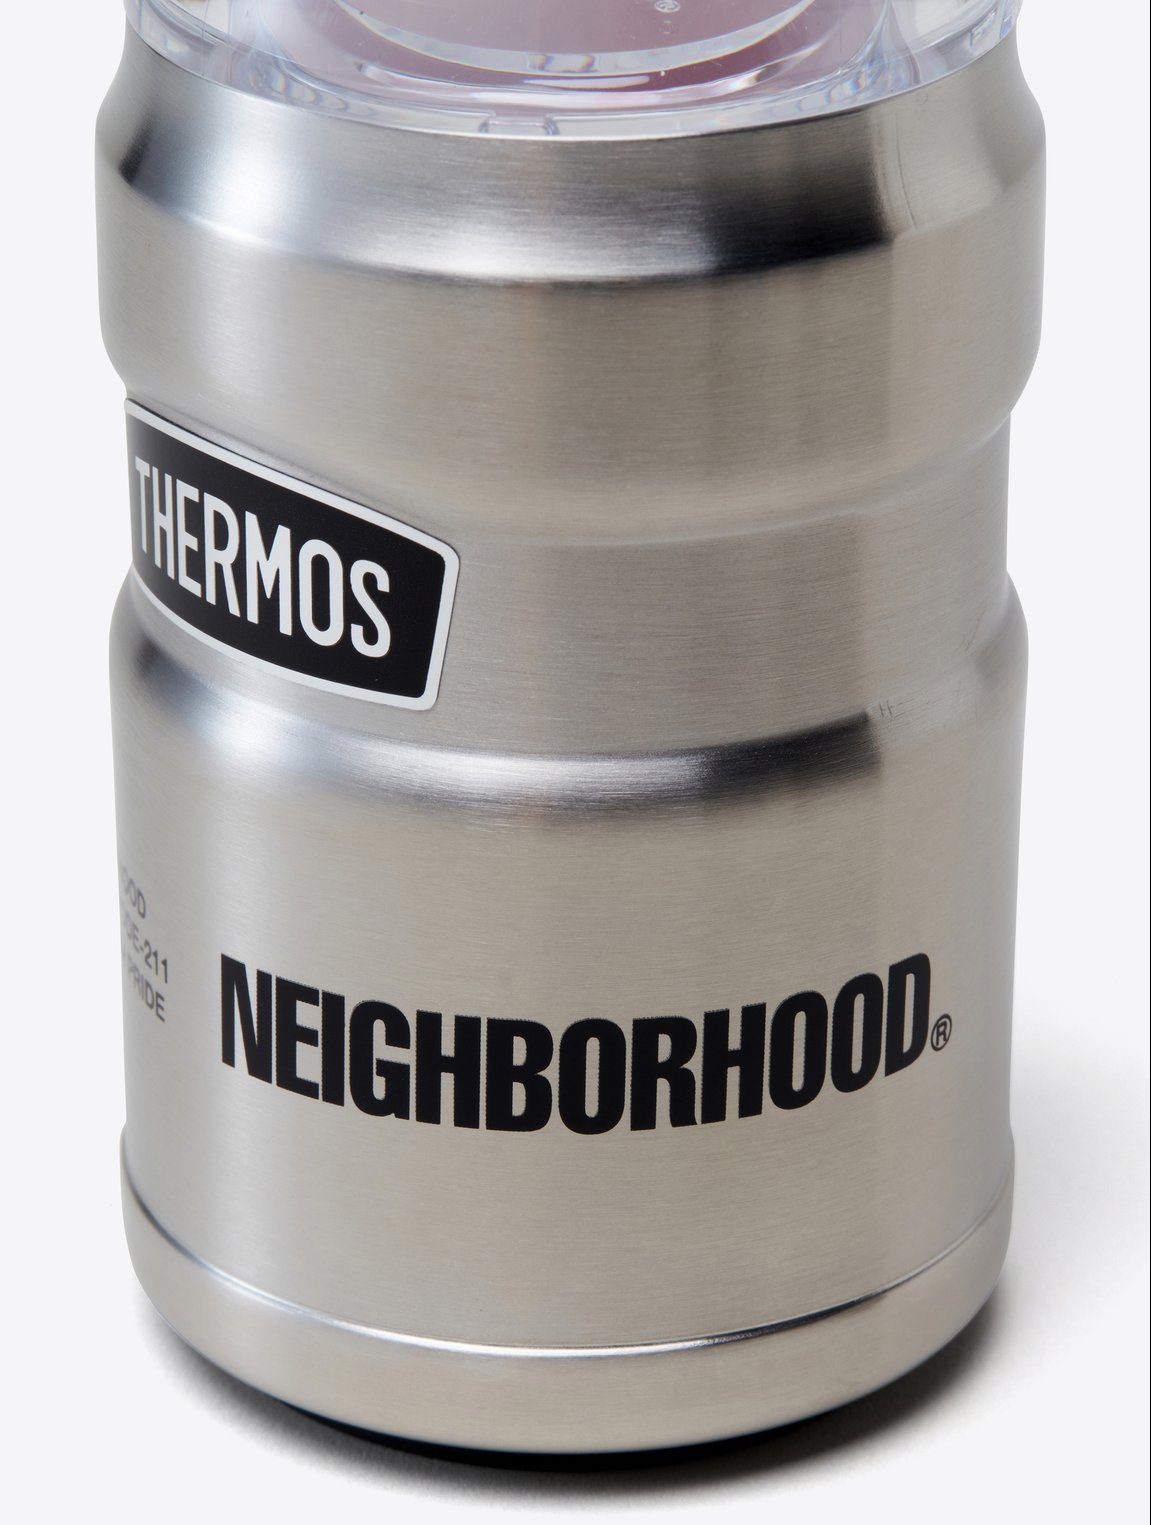 THERMOS / S-CAN HOLDER